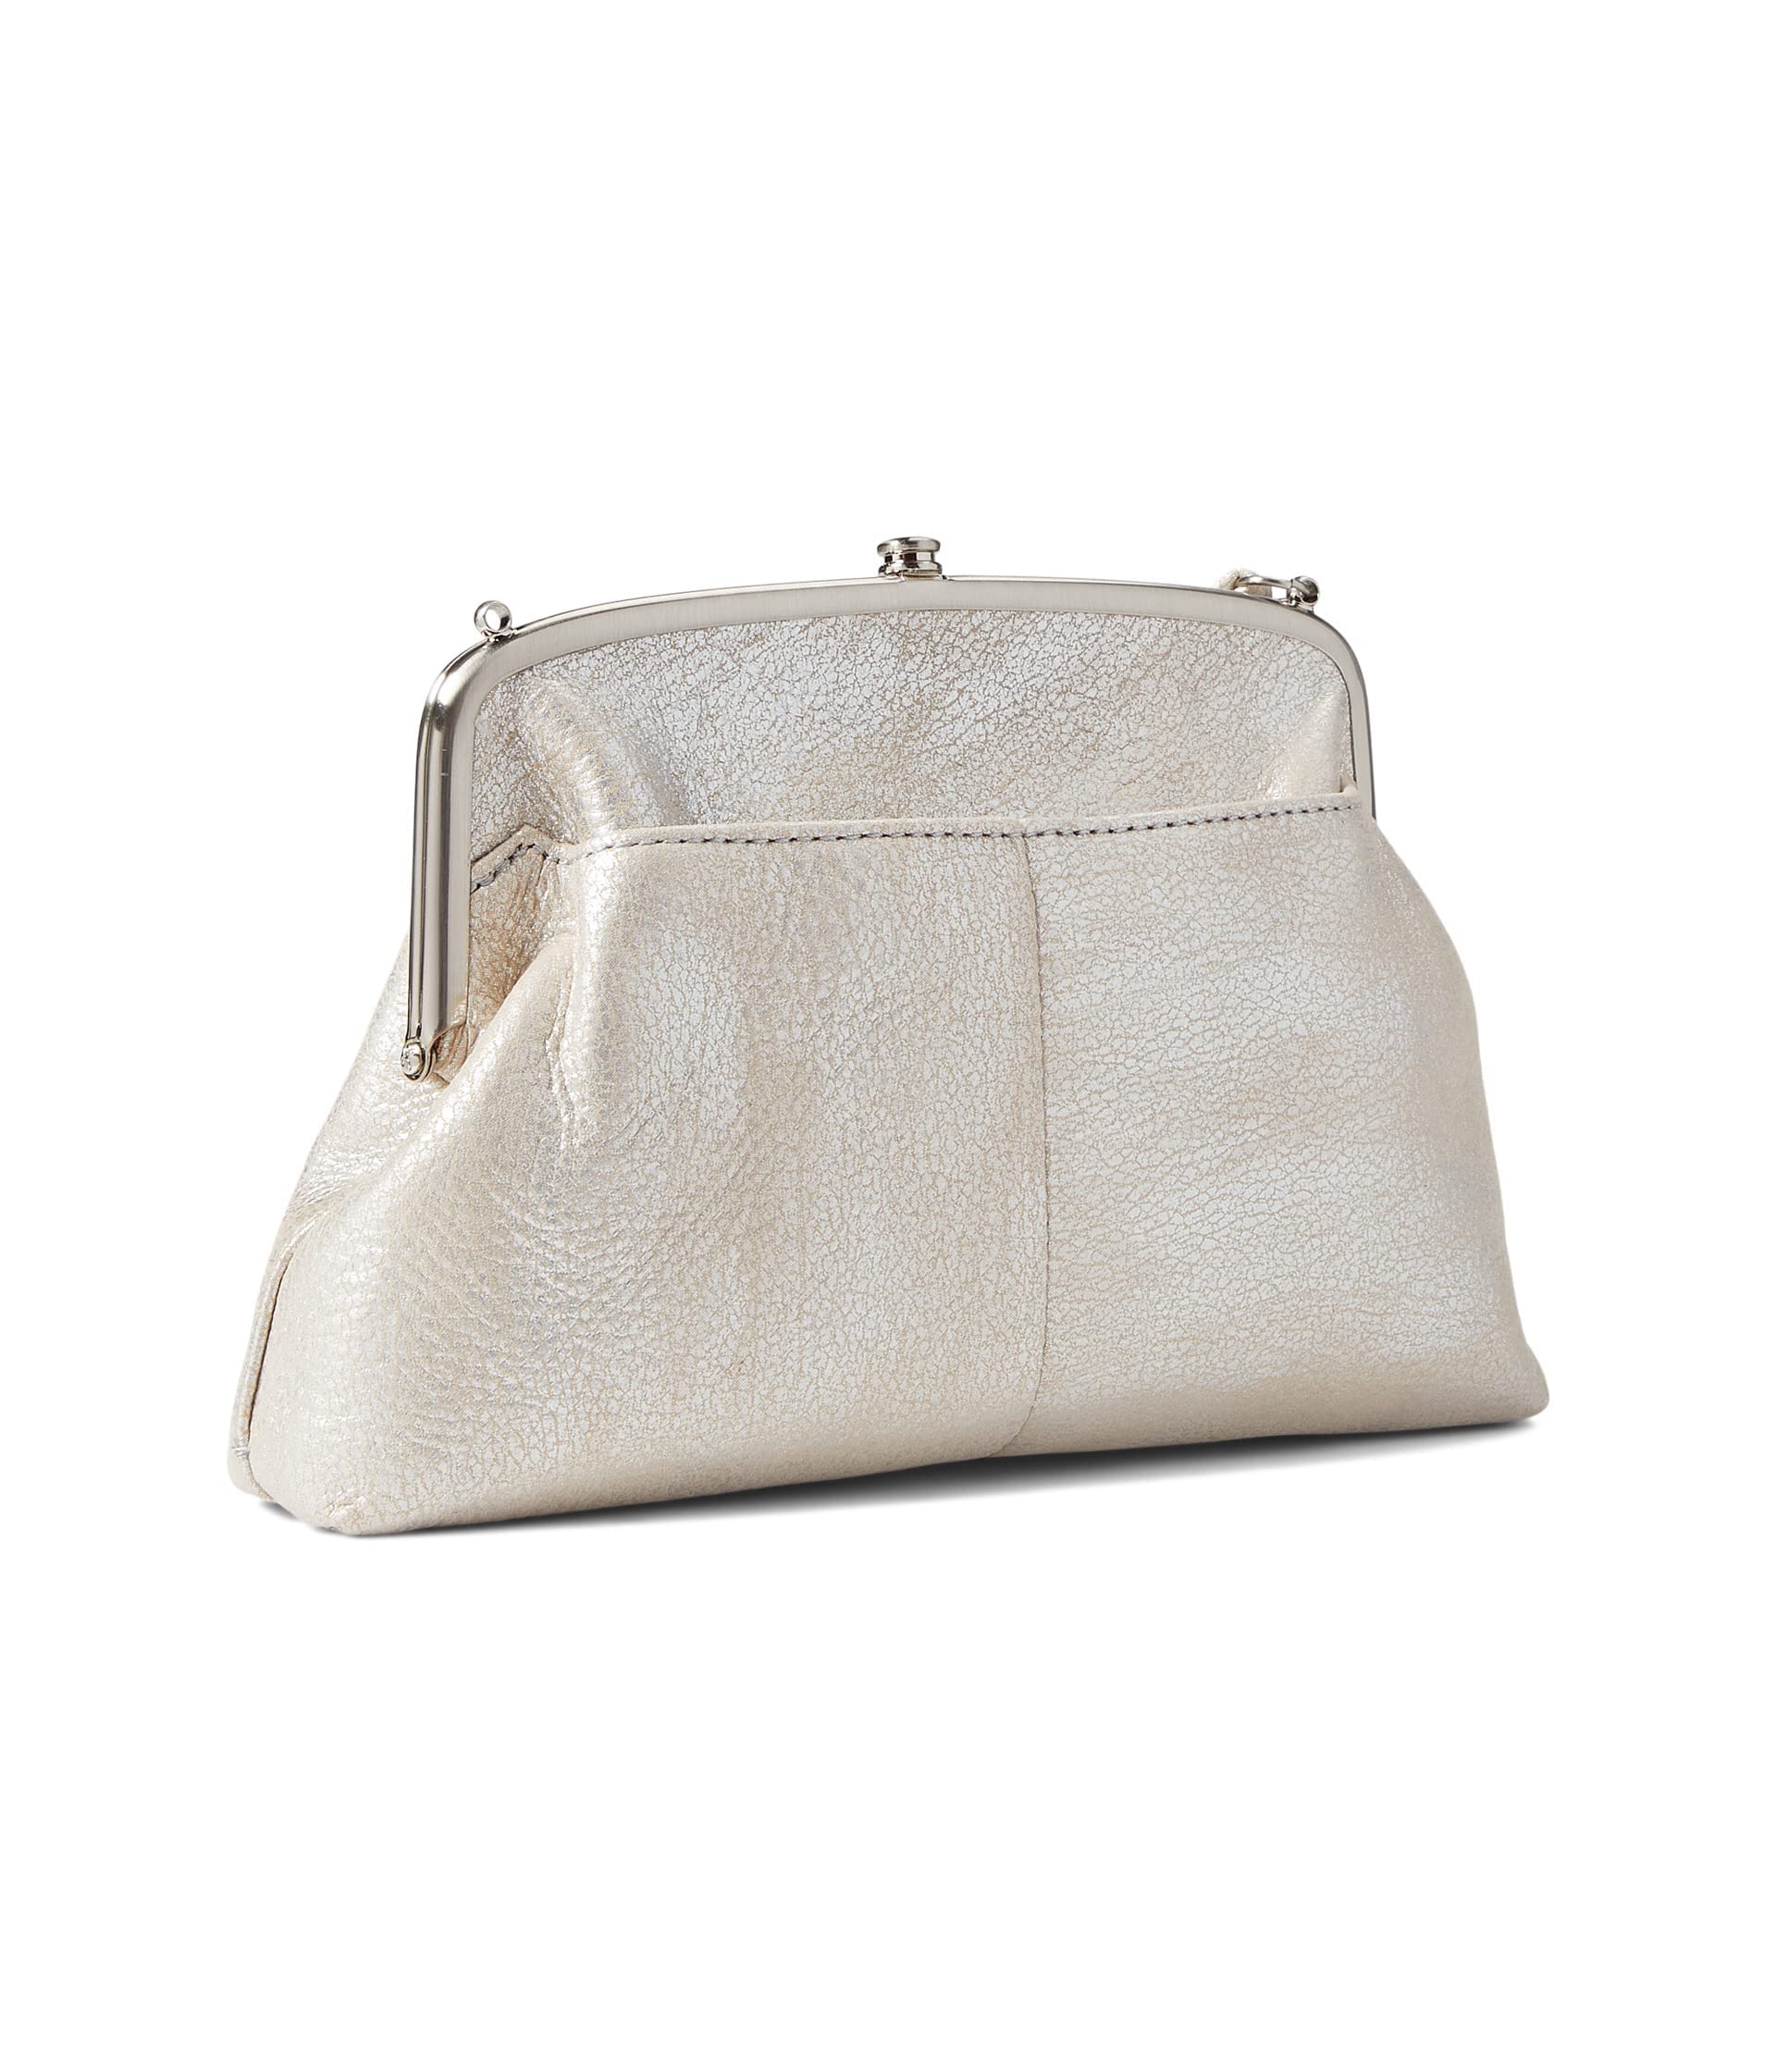 HOBO Lana Shoulder Bag For Women - Snap Top Closure With Interior Pockets and Polyester Lining, Gorgeous and Practical Bag